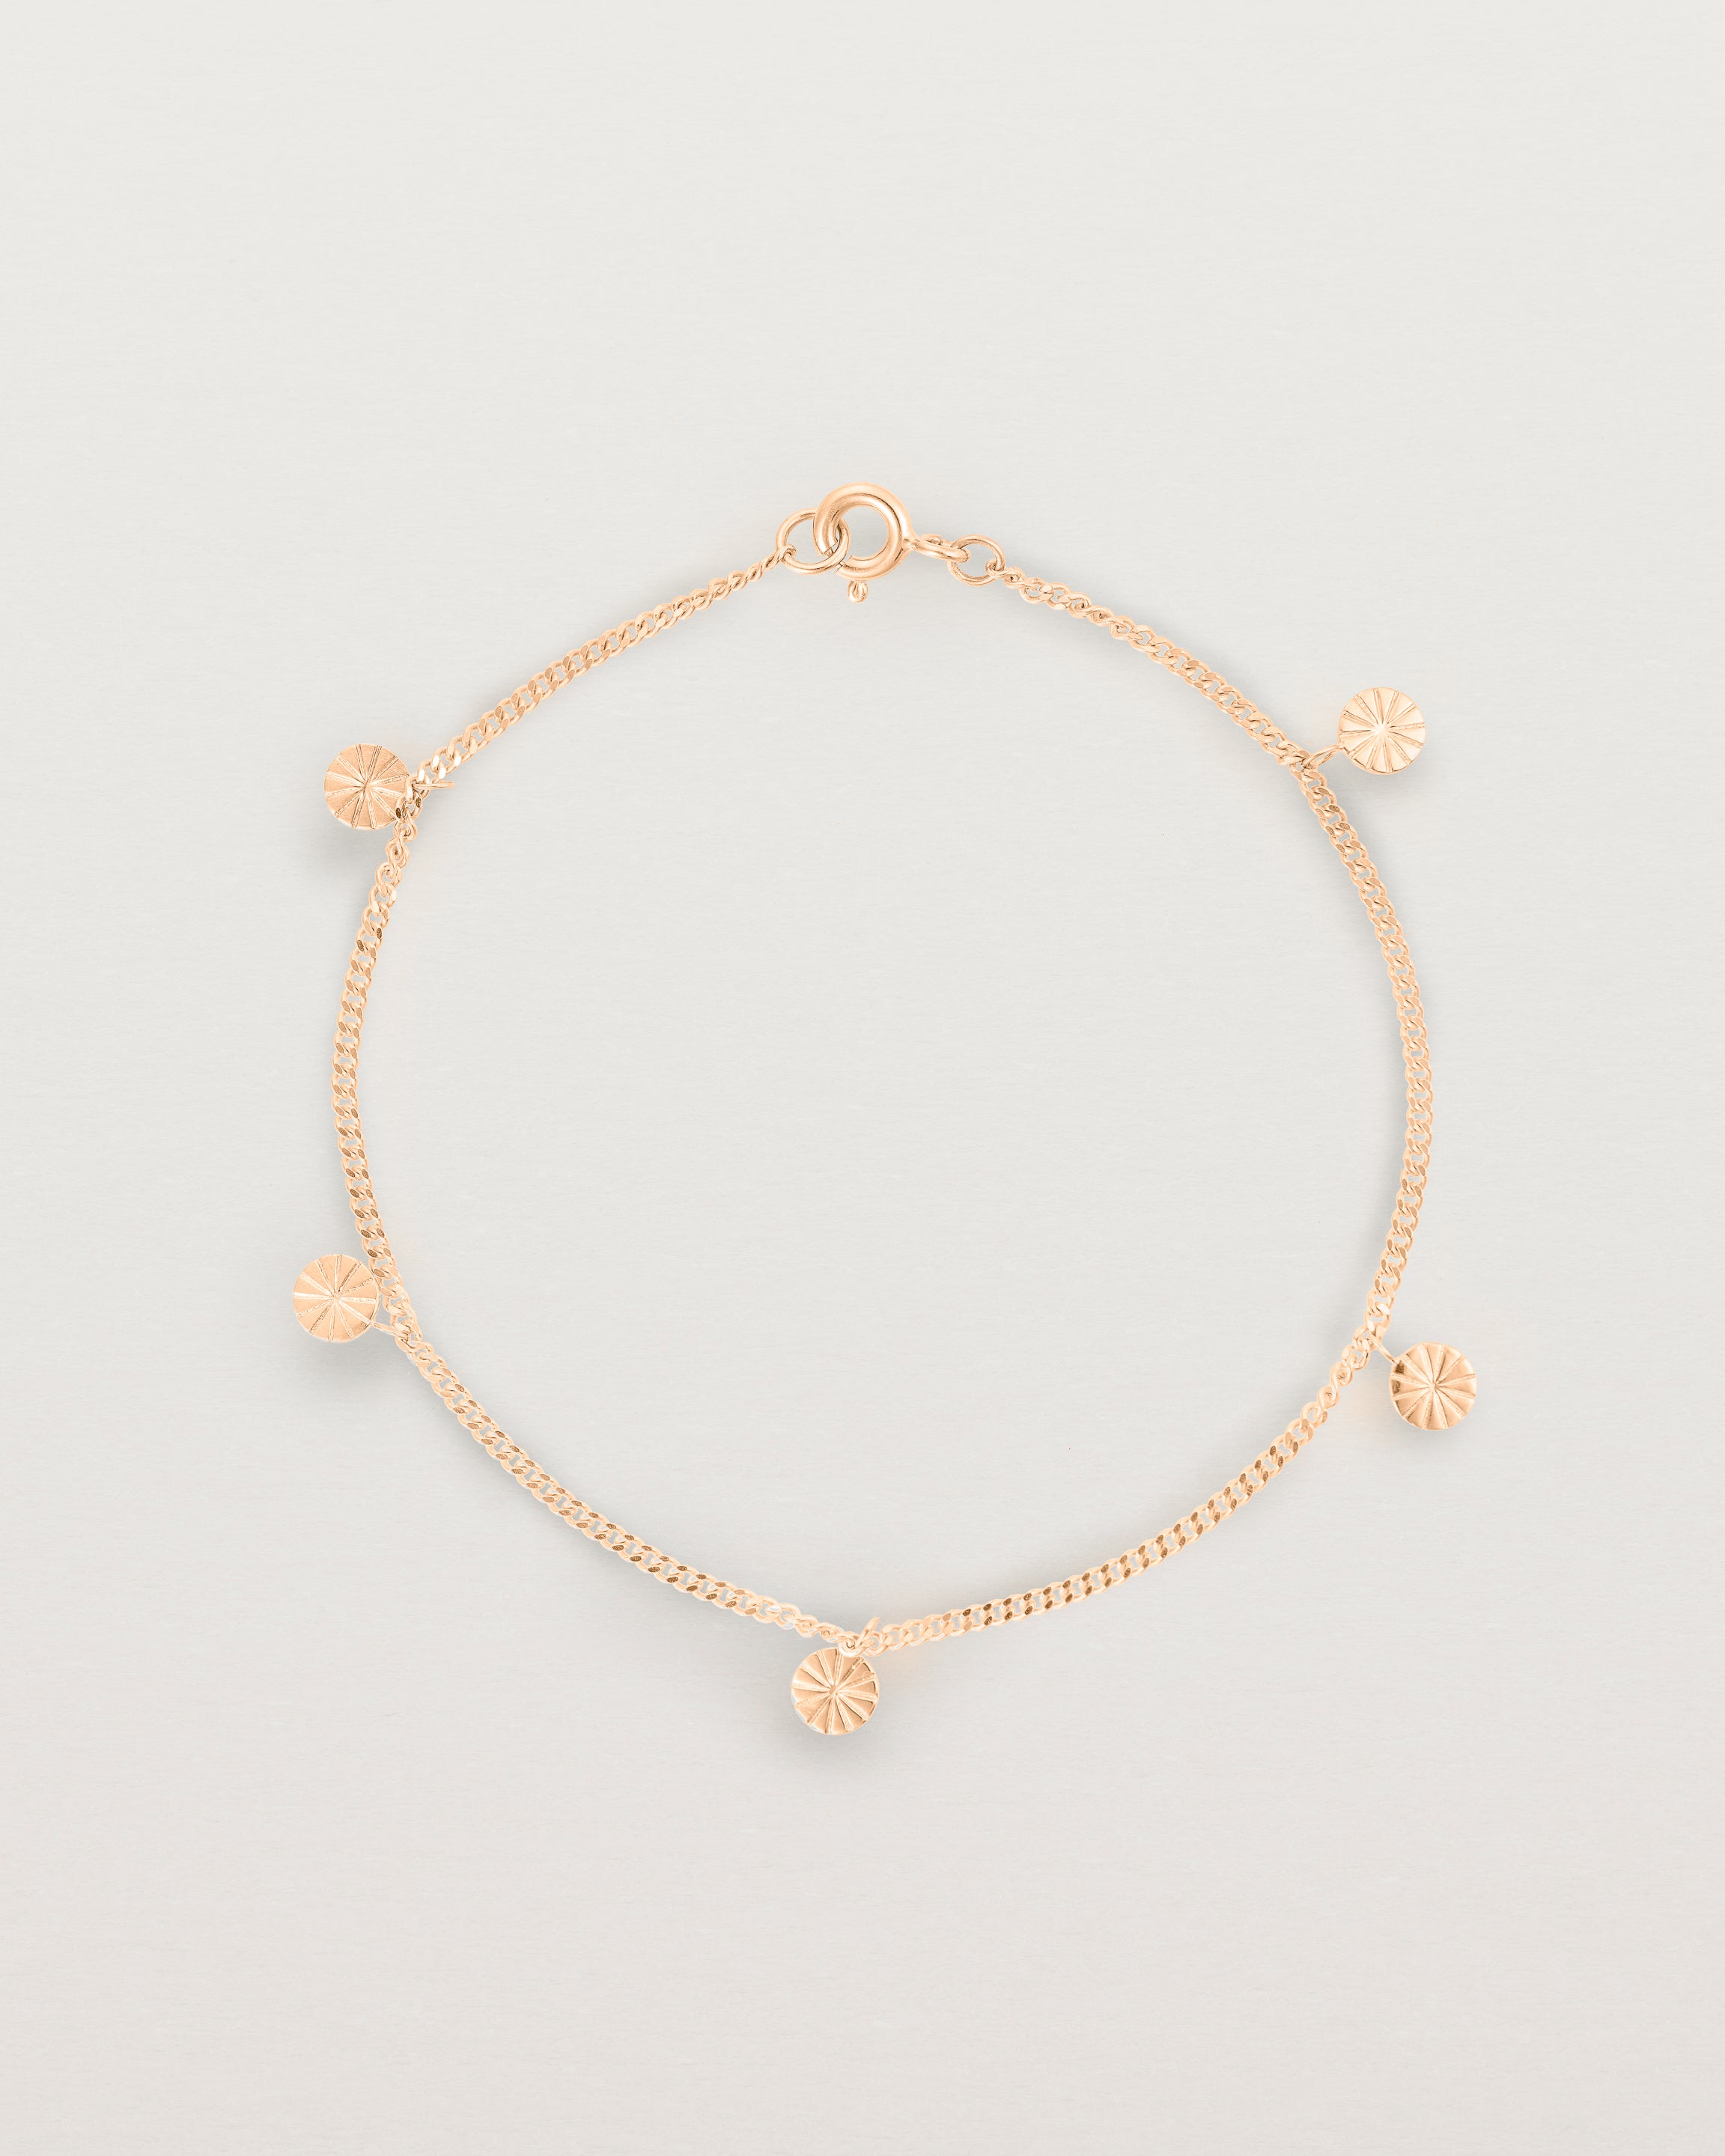 A rose gold chain bracelet with five circle charms